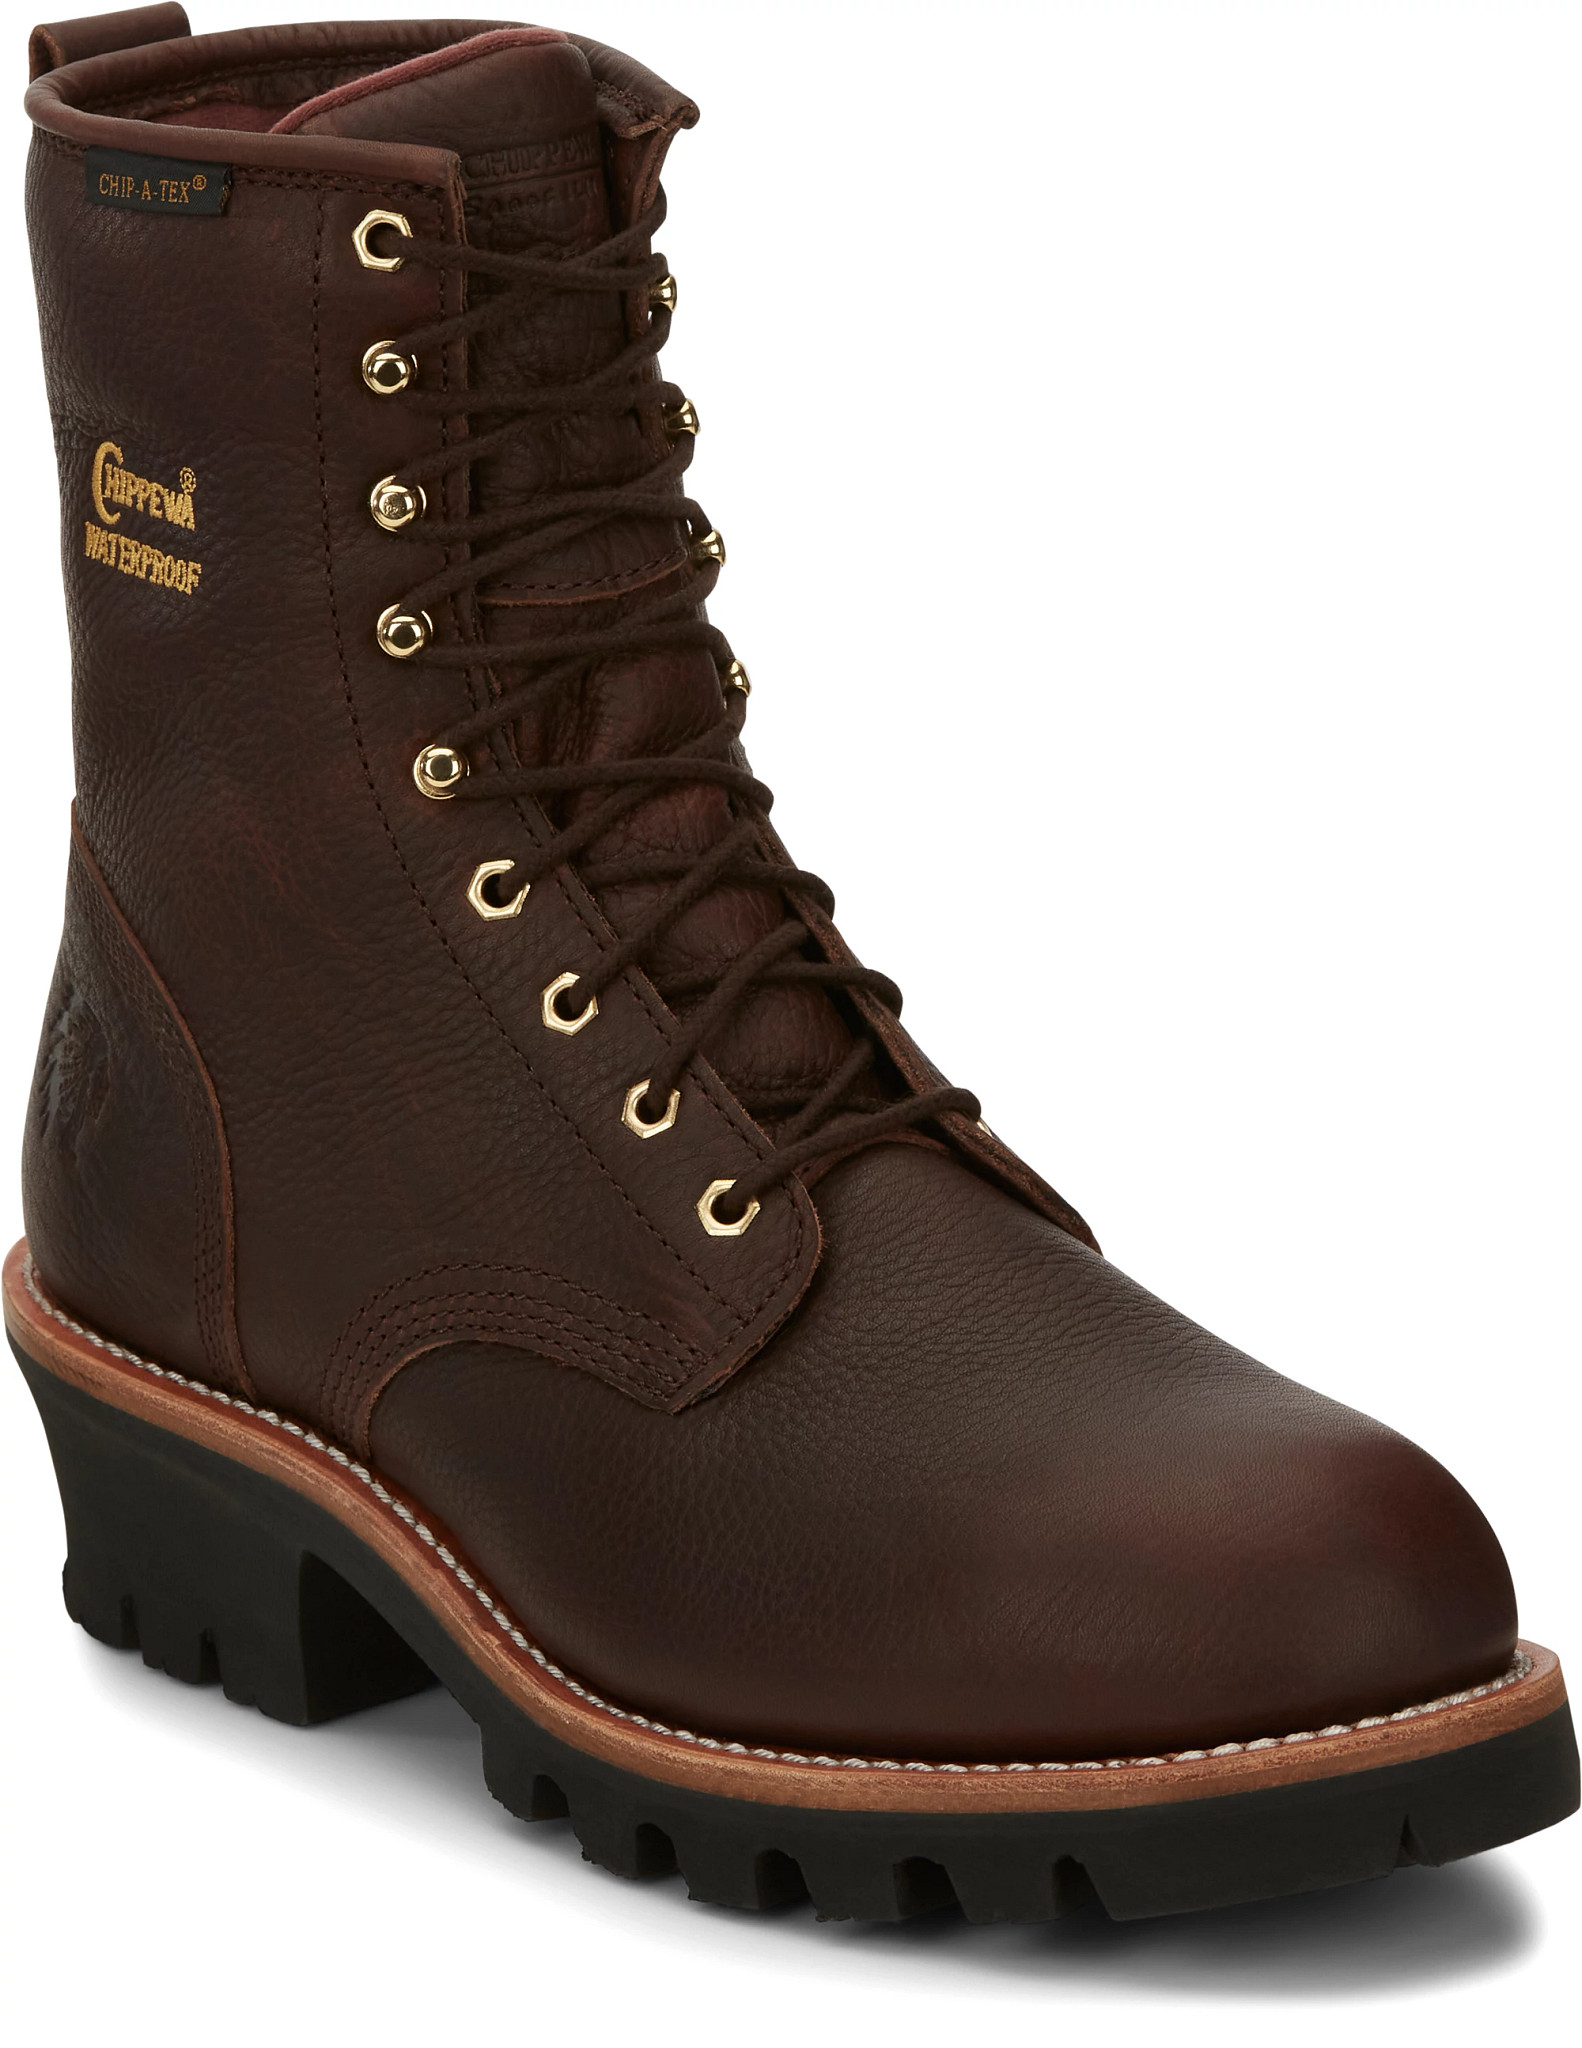 Shop Men's Work Boots and Shoes | Chippewa Boots